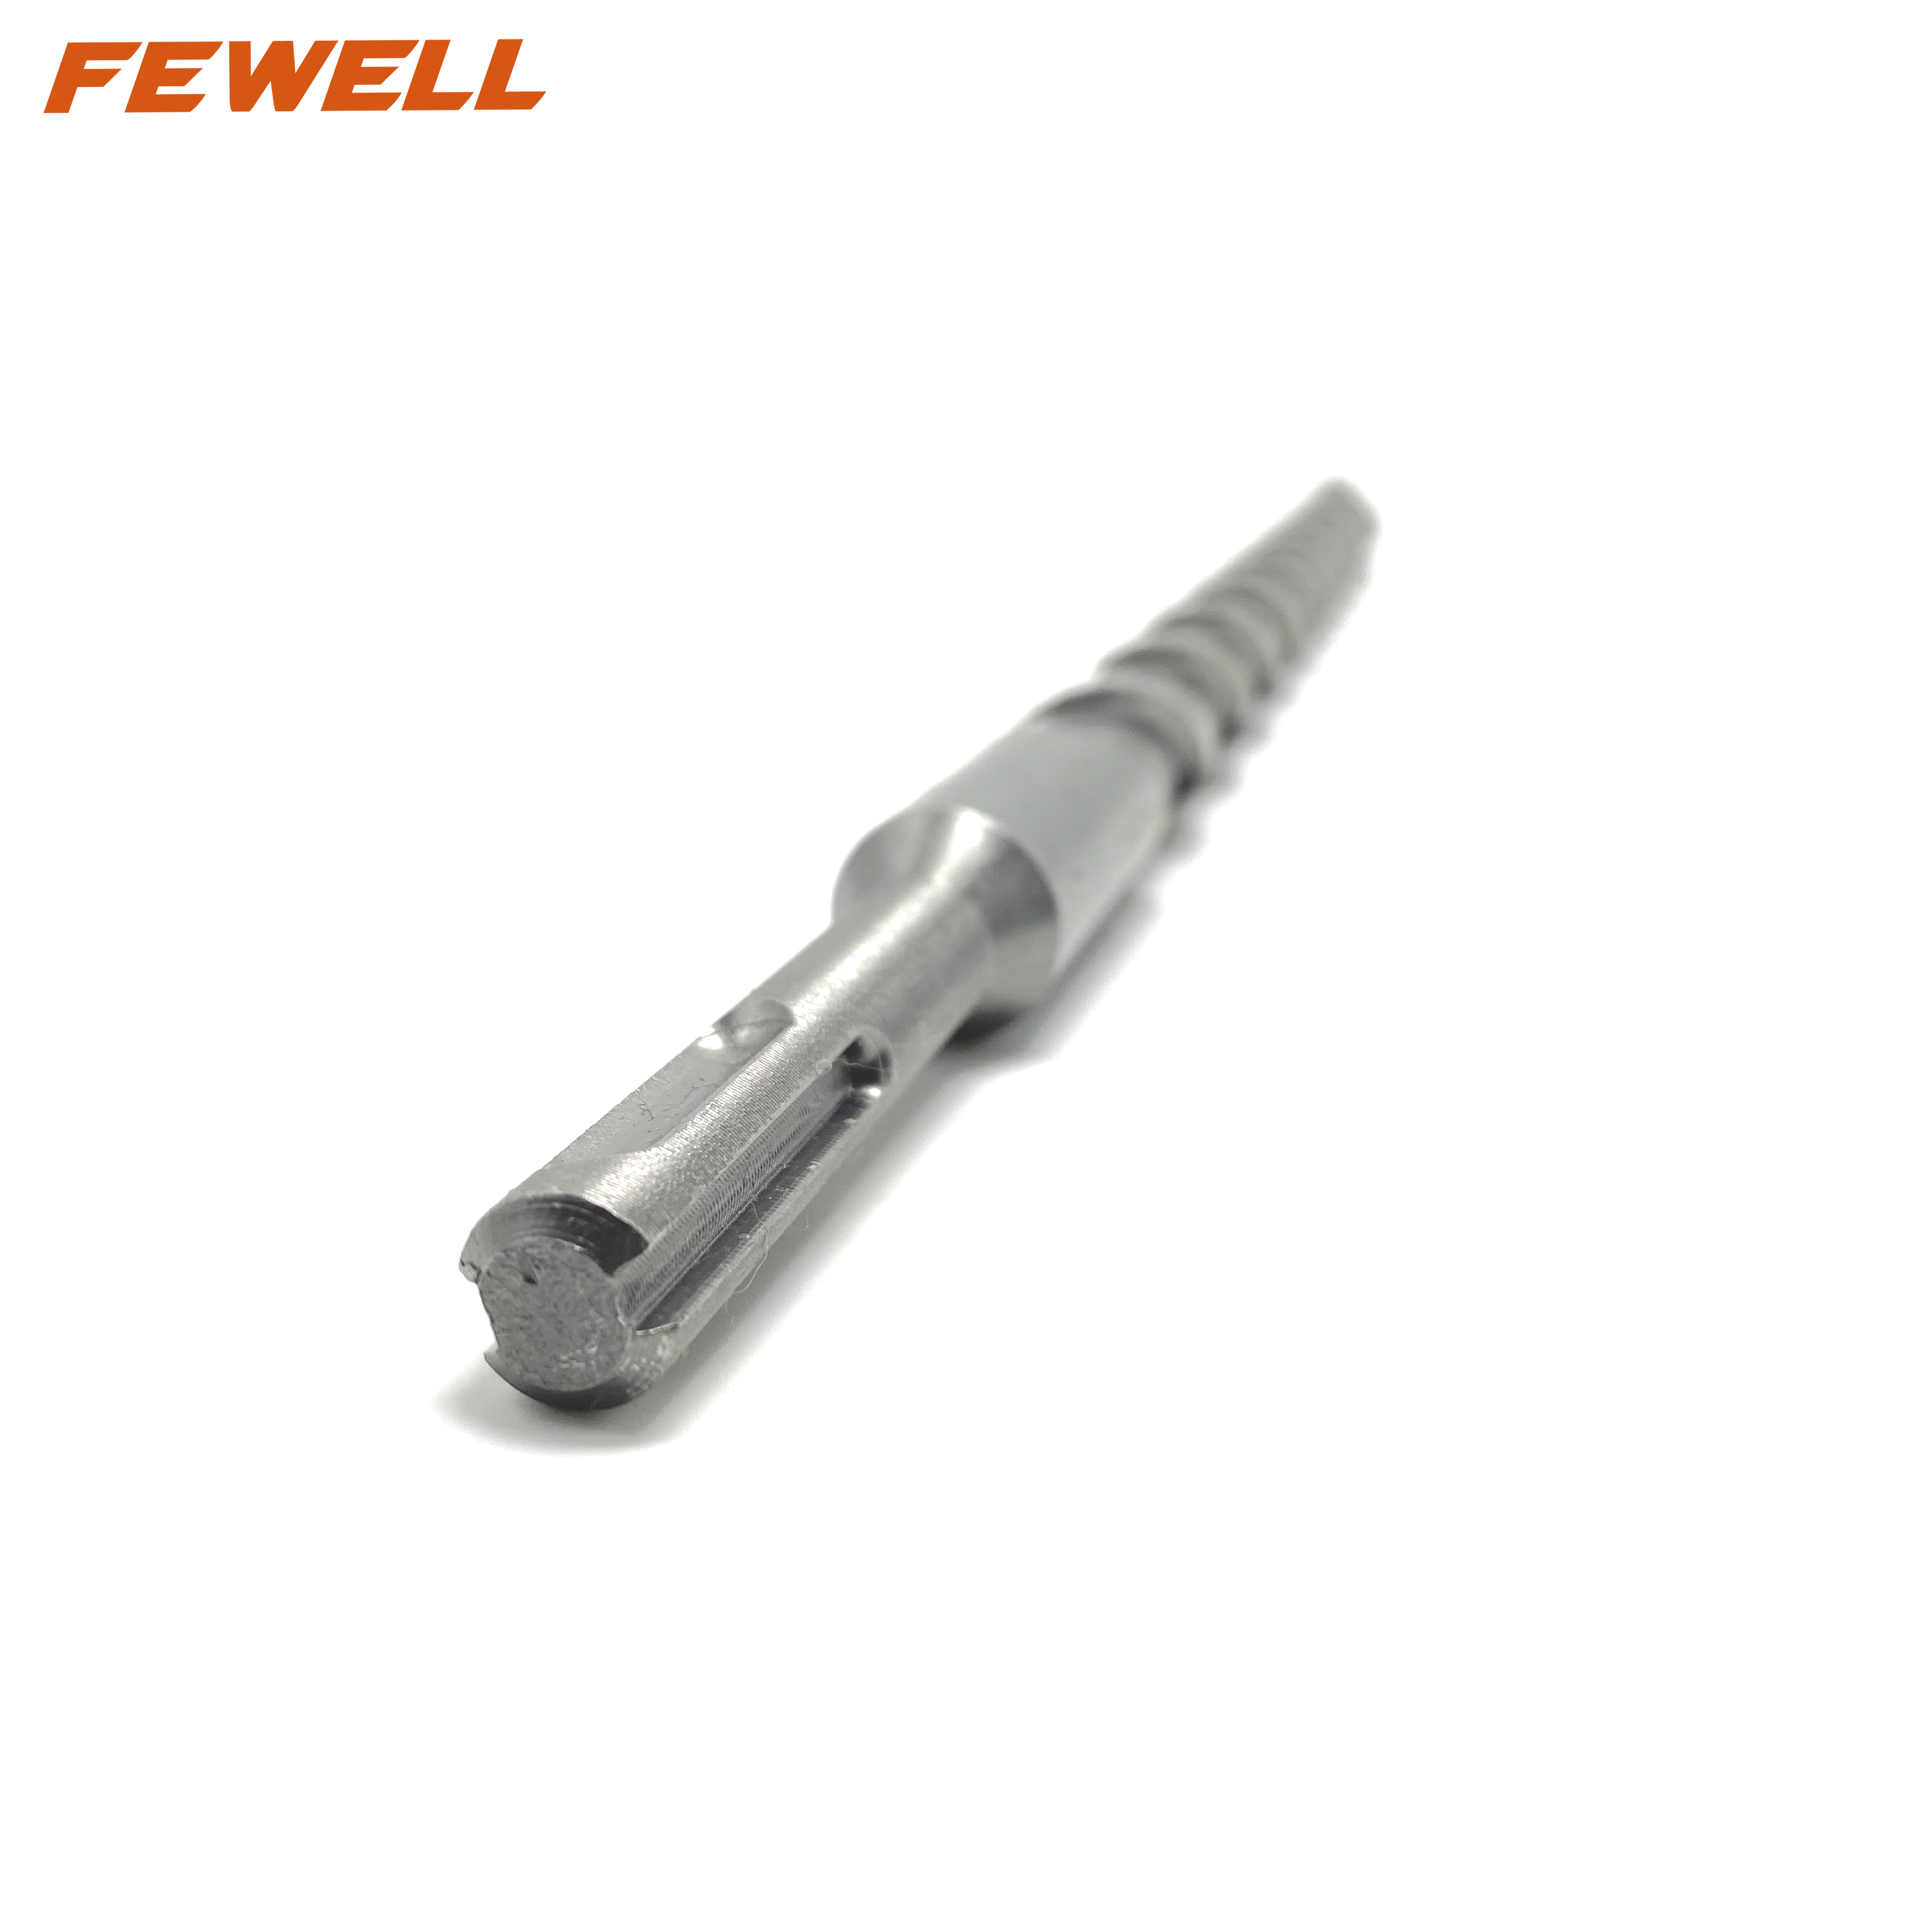  High quality SDS Plus tungsten Carbide Single Flat Tip 18mm Double Flute Electric hammer Drill Bit for Concrete wall Masonry Granite